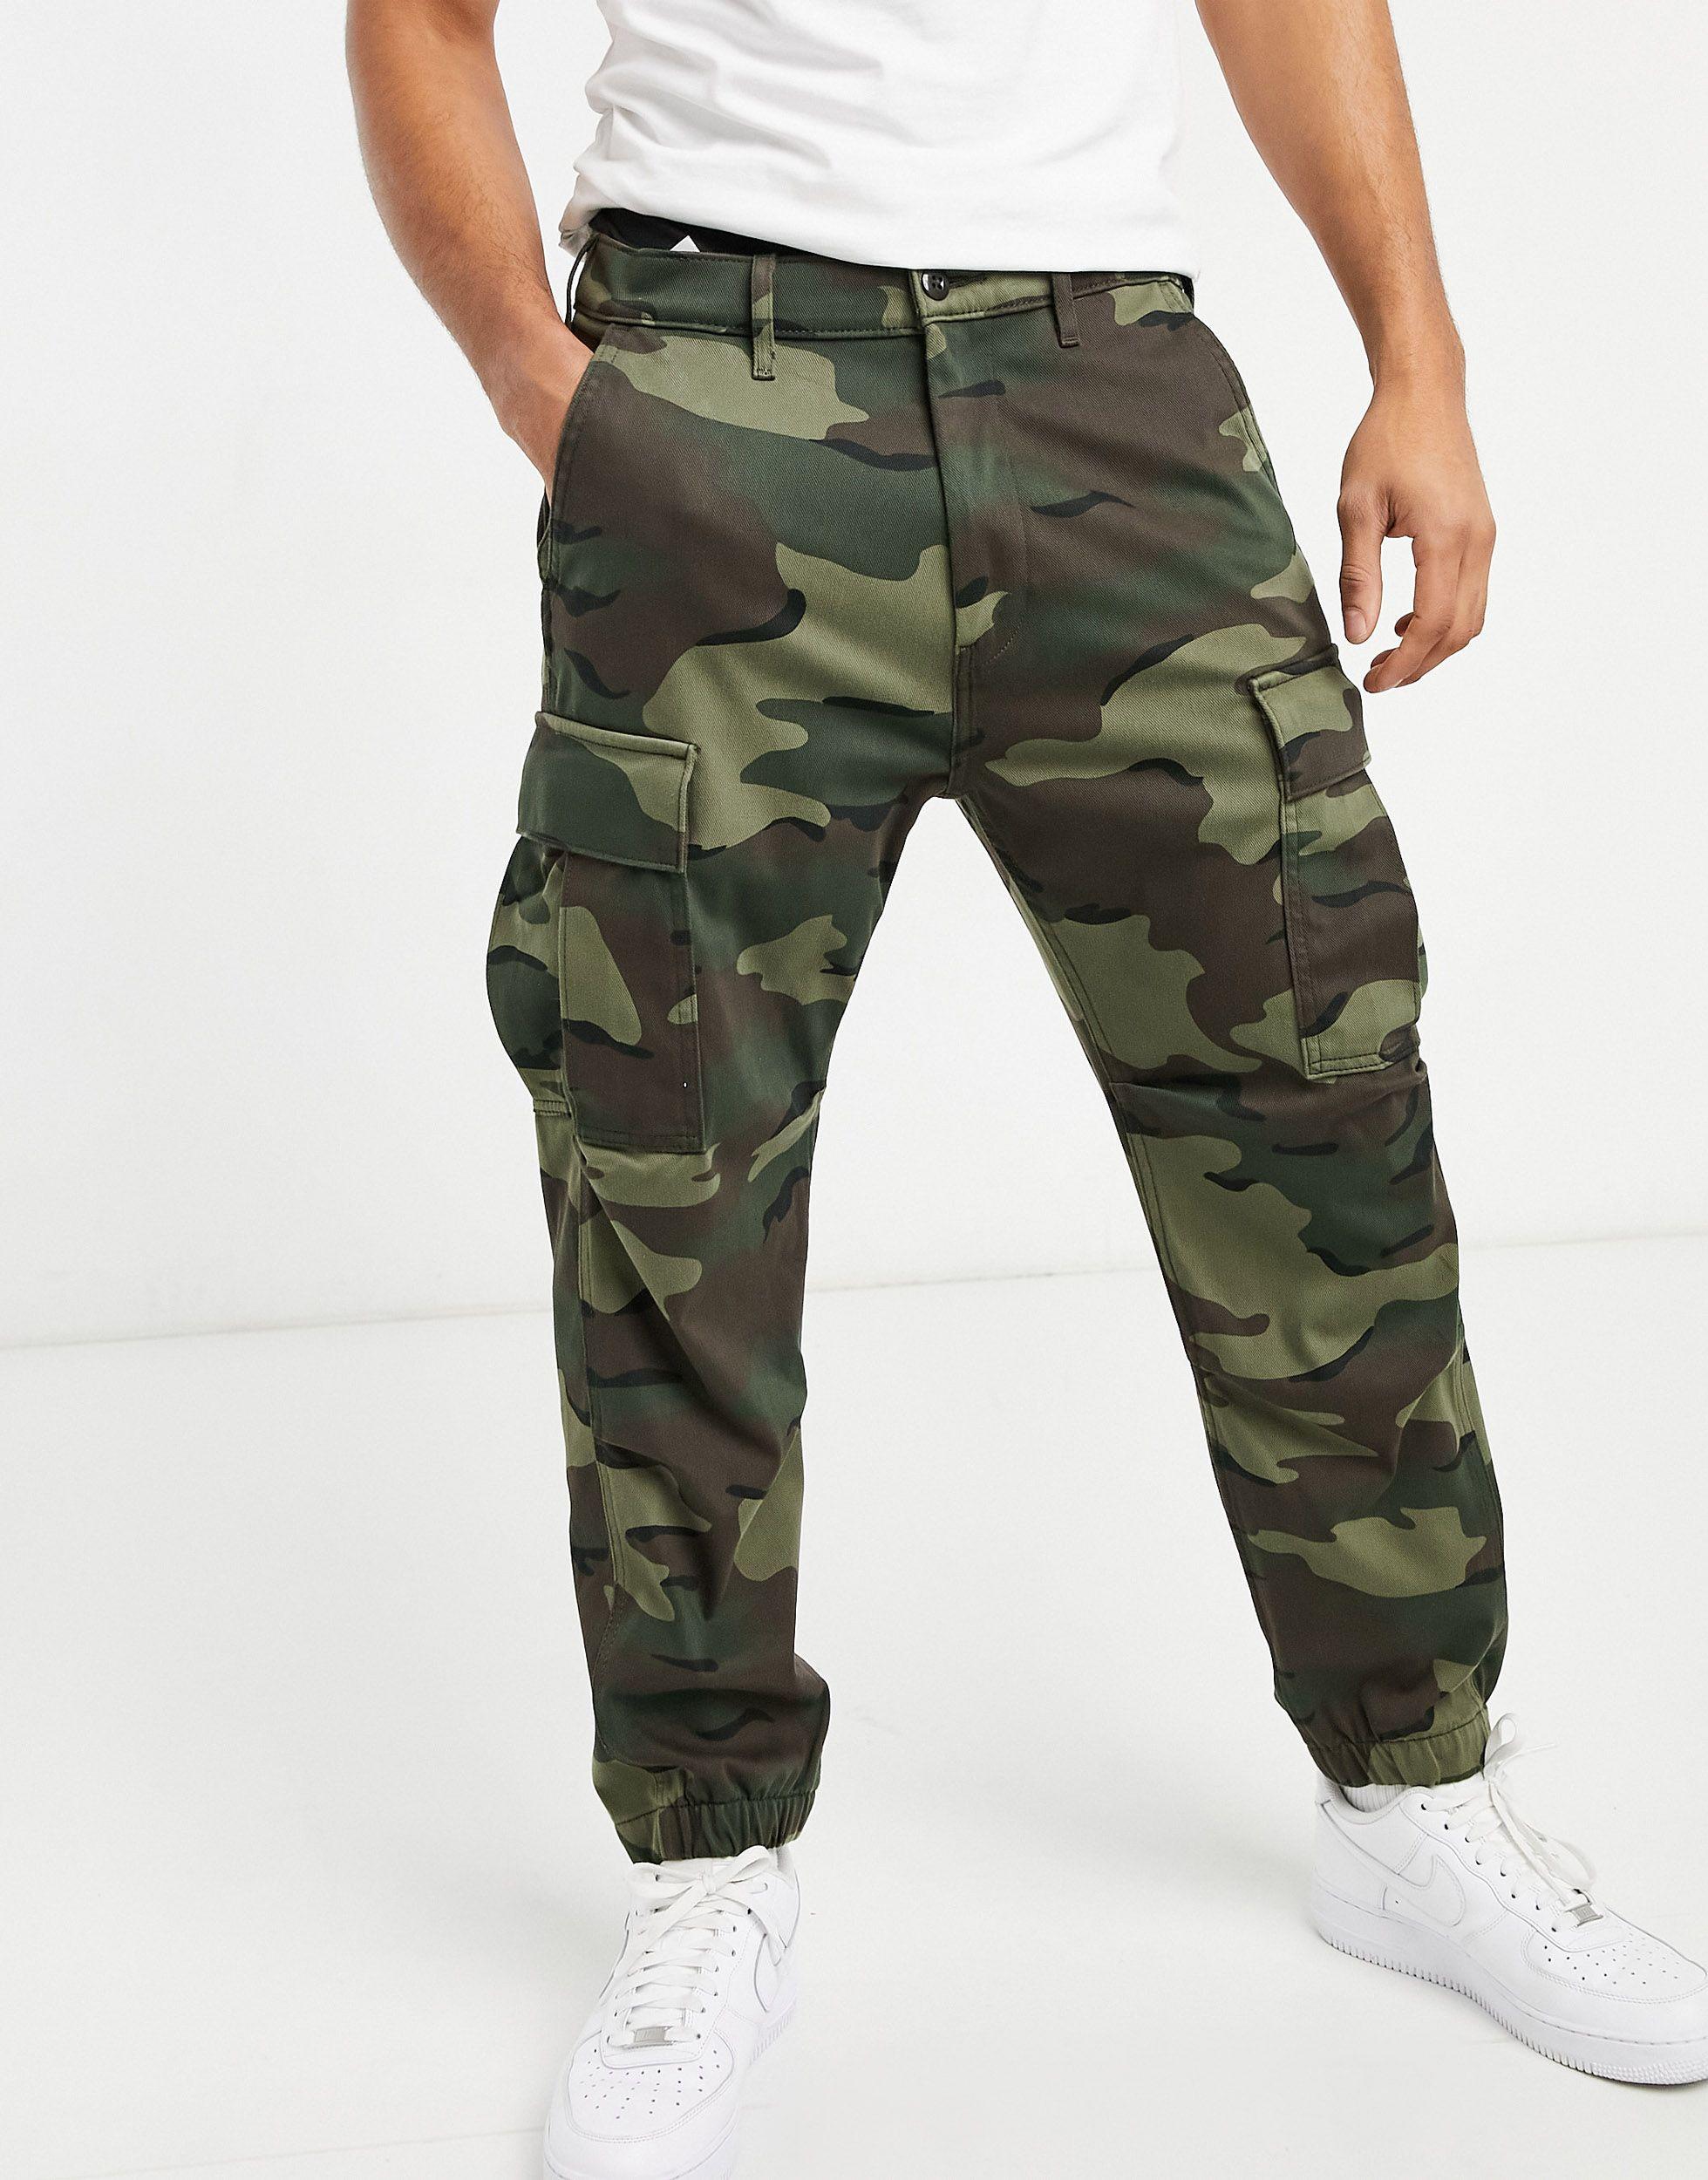 Levi's Denim Tapered Wave Camo Cargo Trousers in Green for Men - Lyst